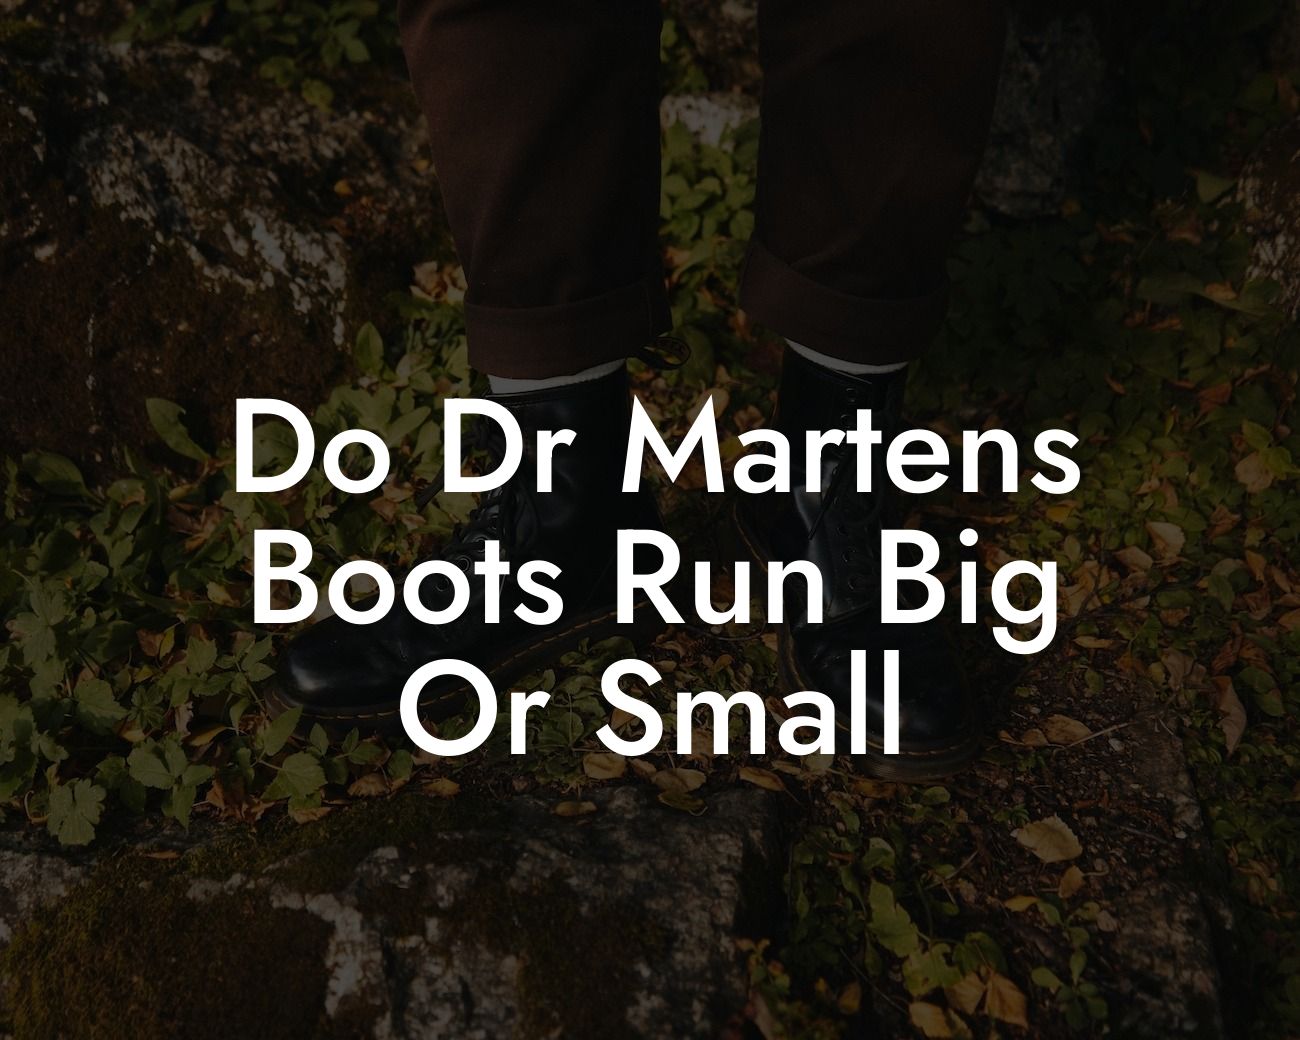 Do Dr Martens Boots Run Big Or Small